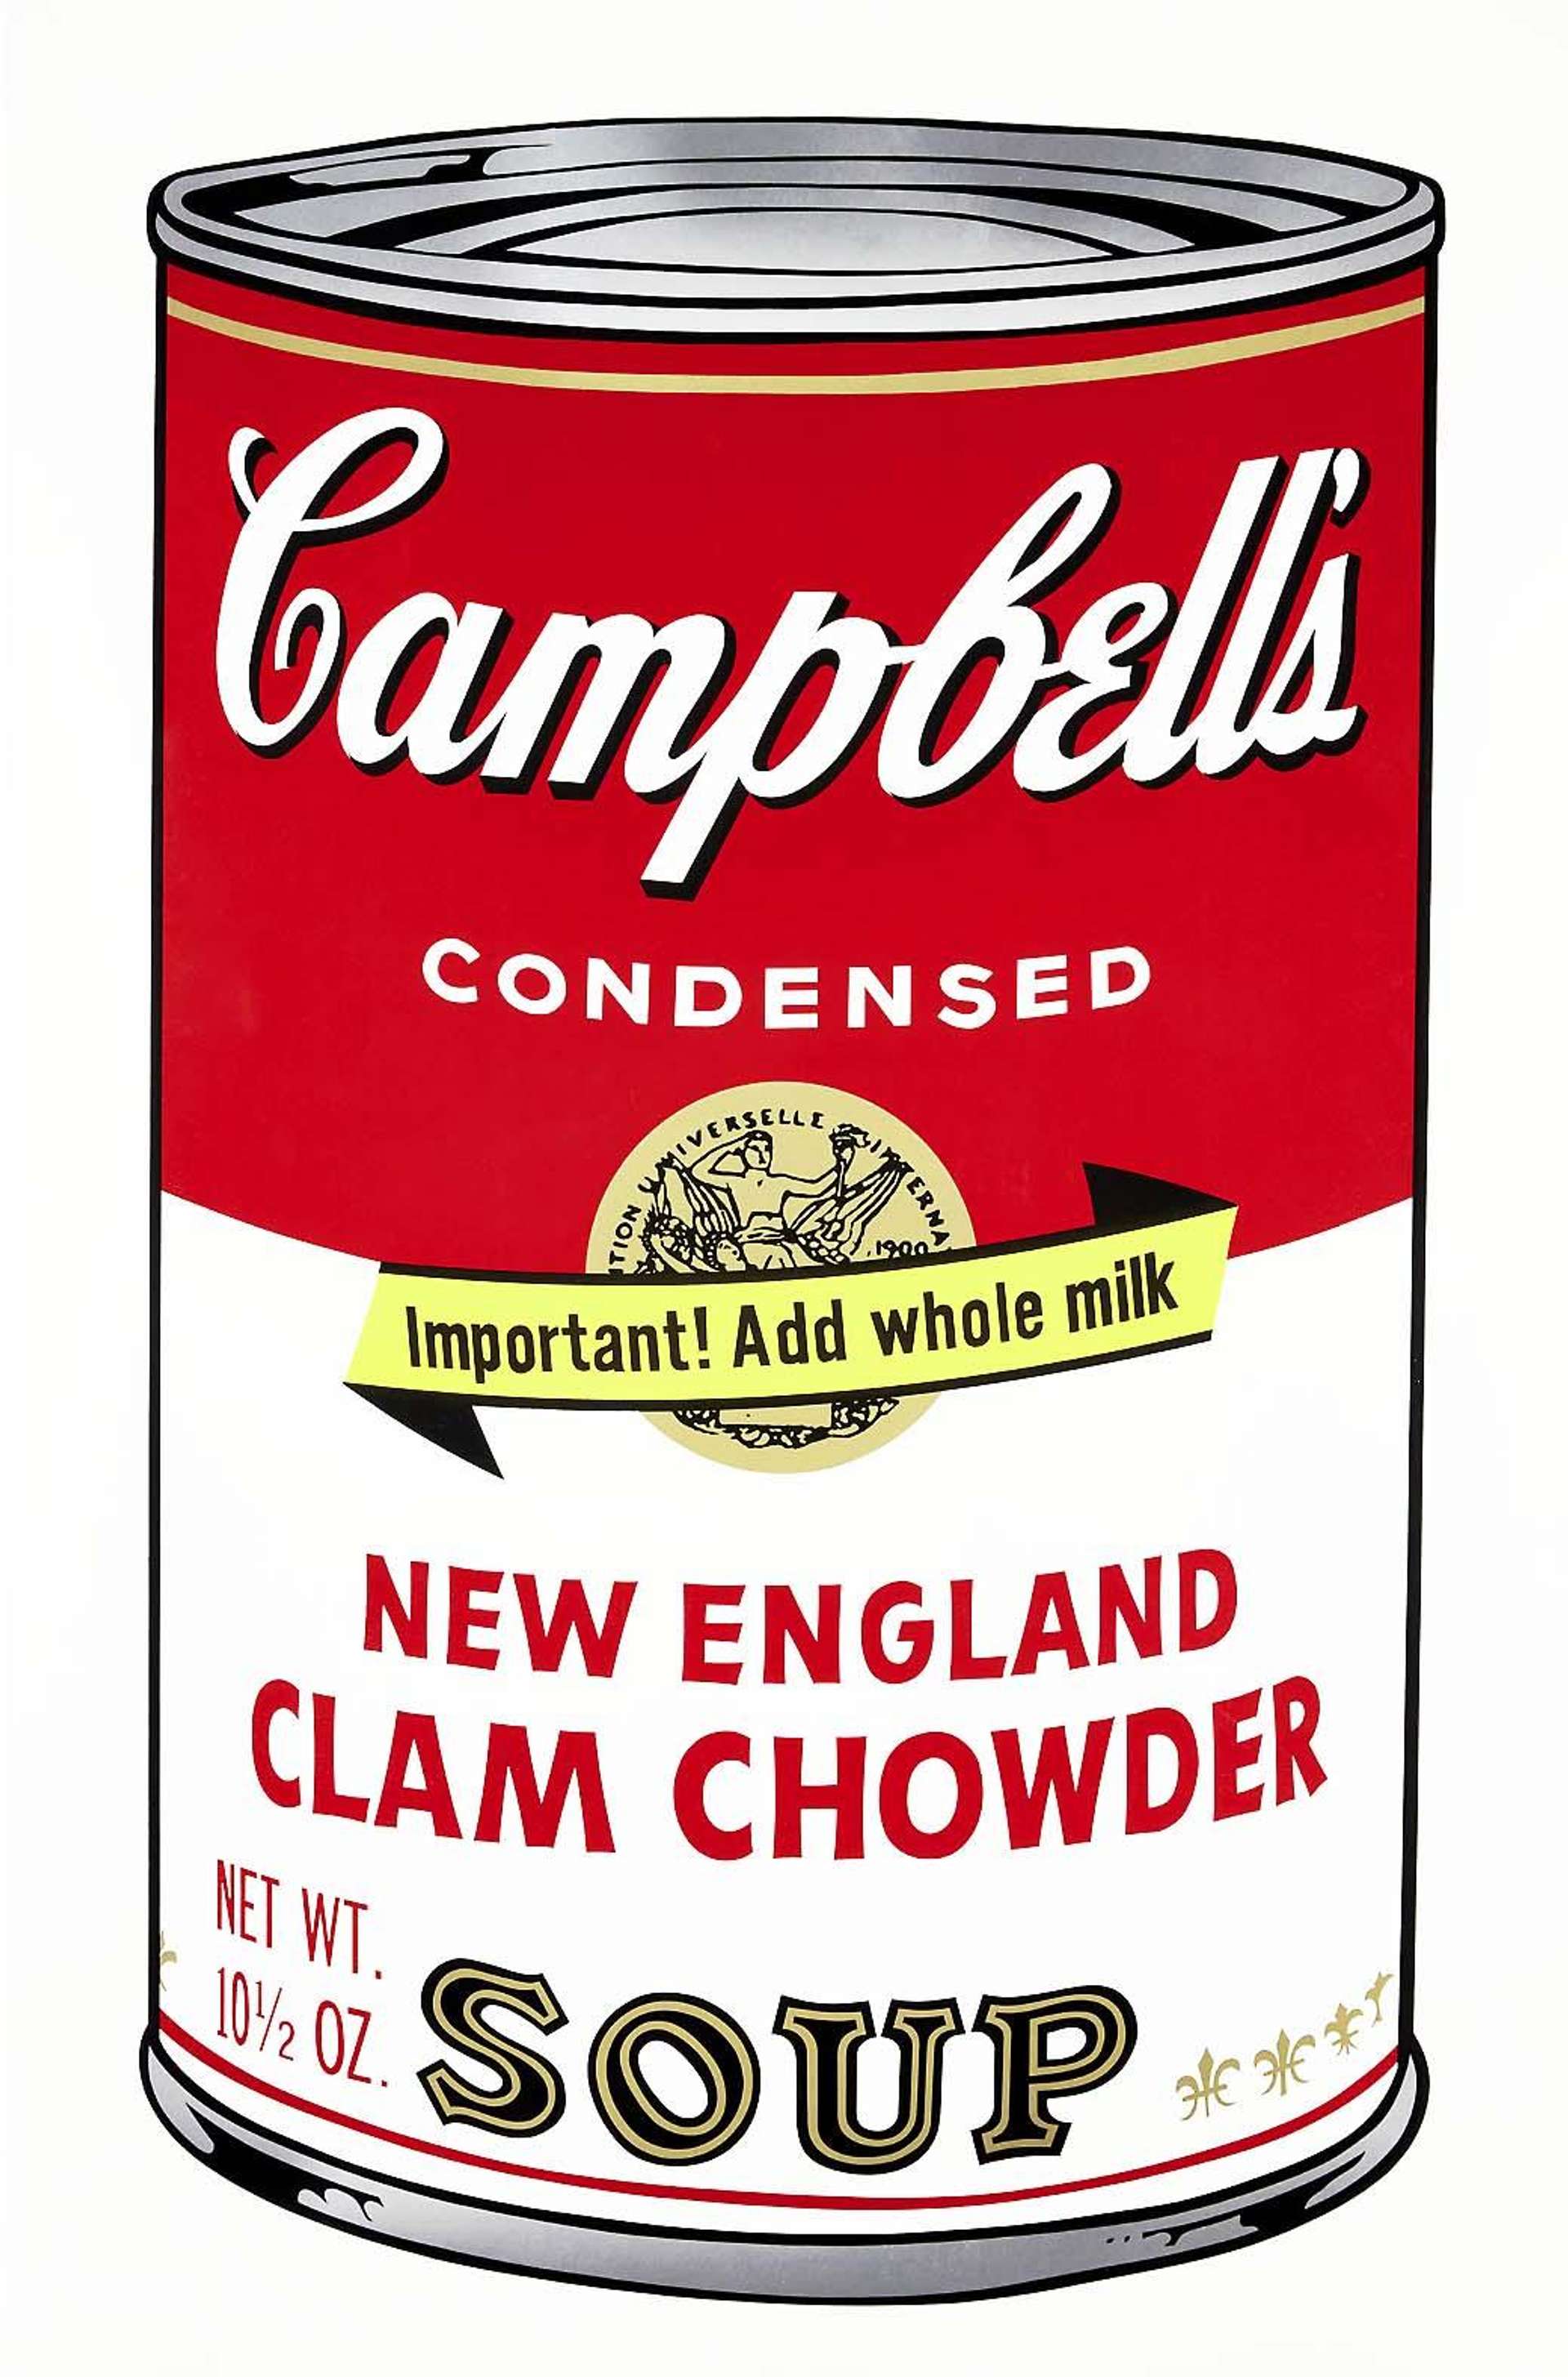 A can of Campbell’s clam chowder soup in the style of Pop Art